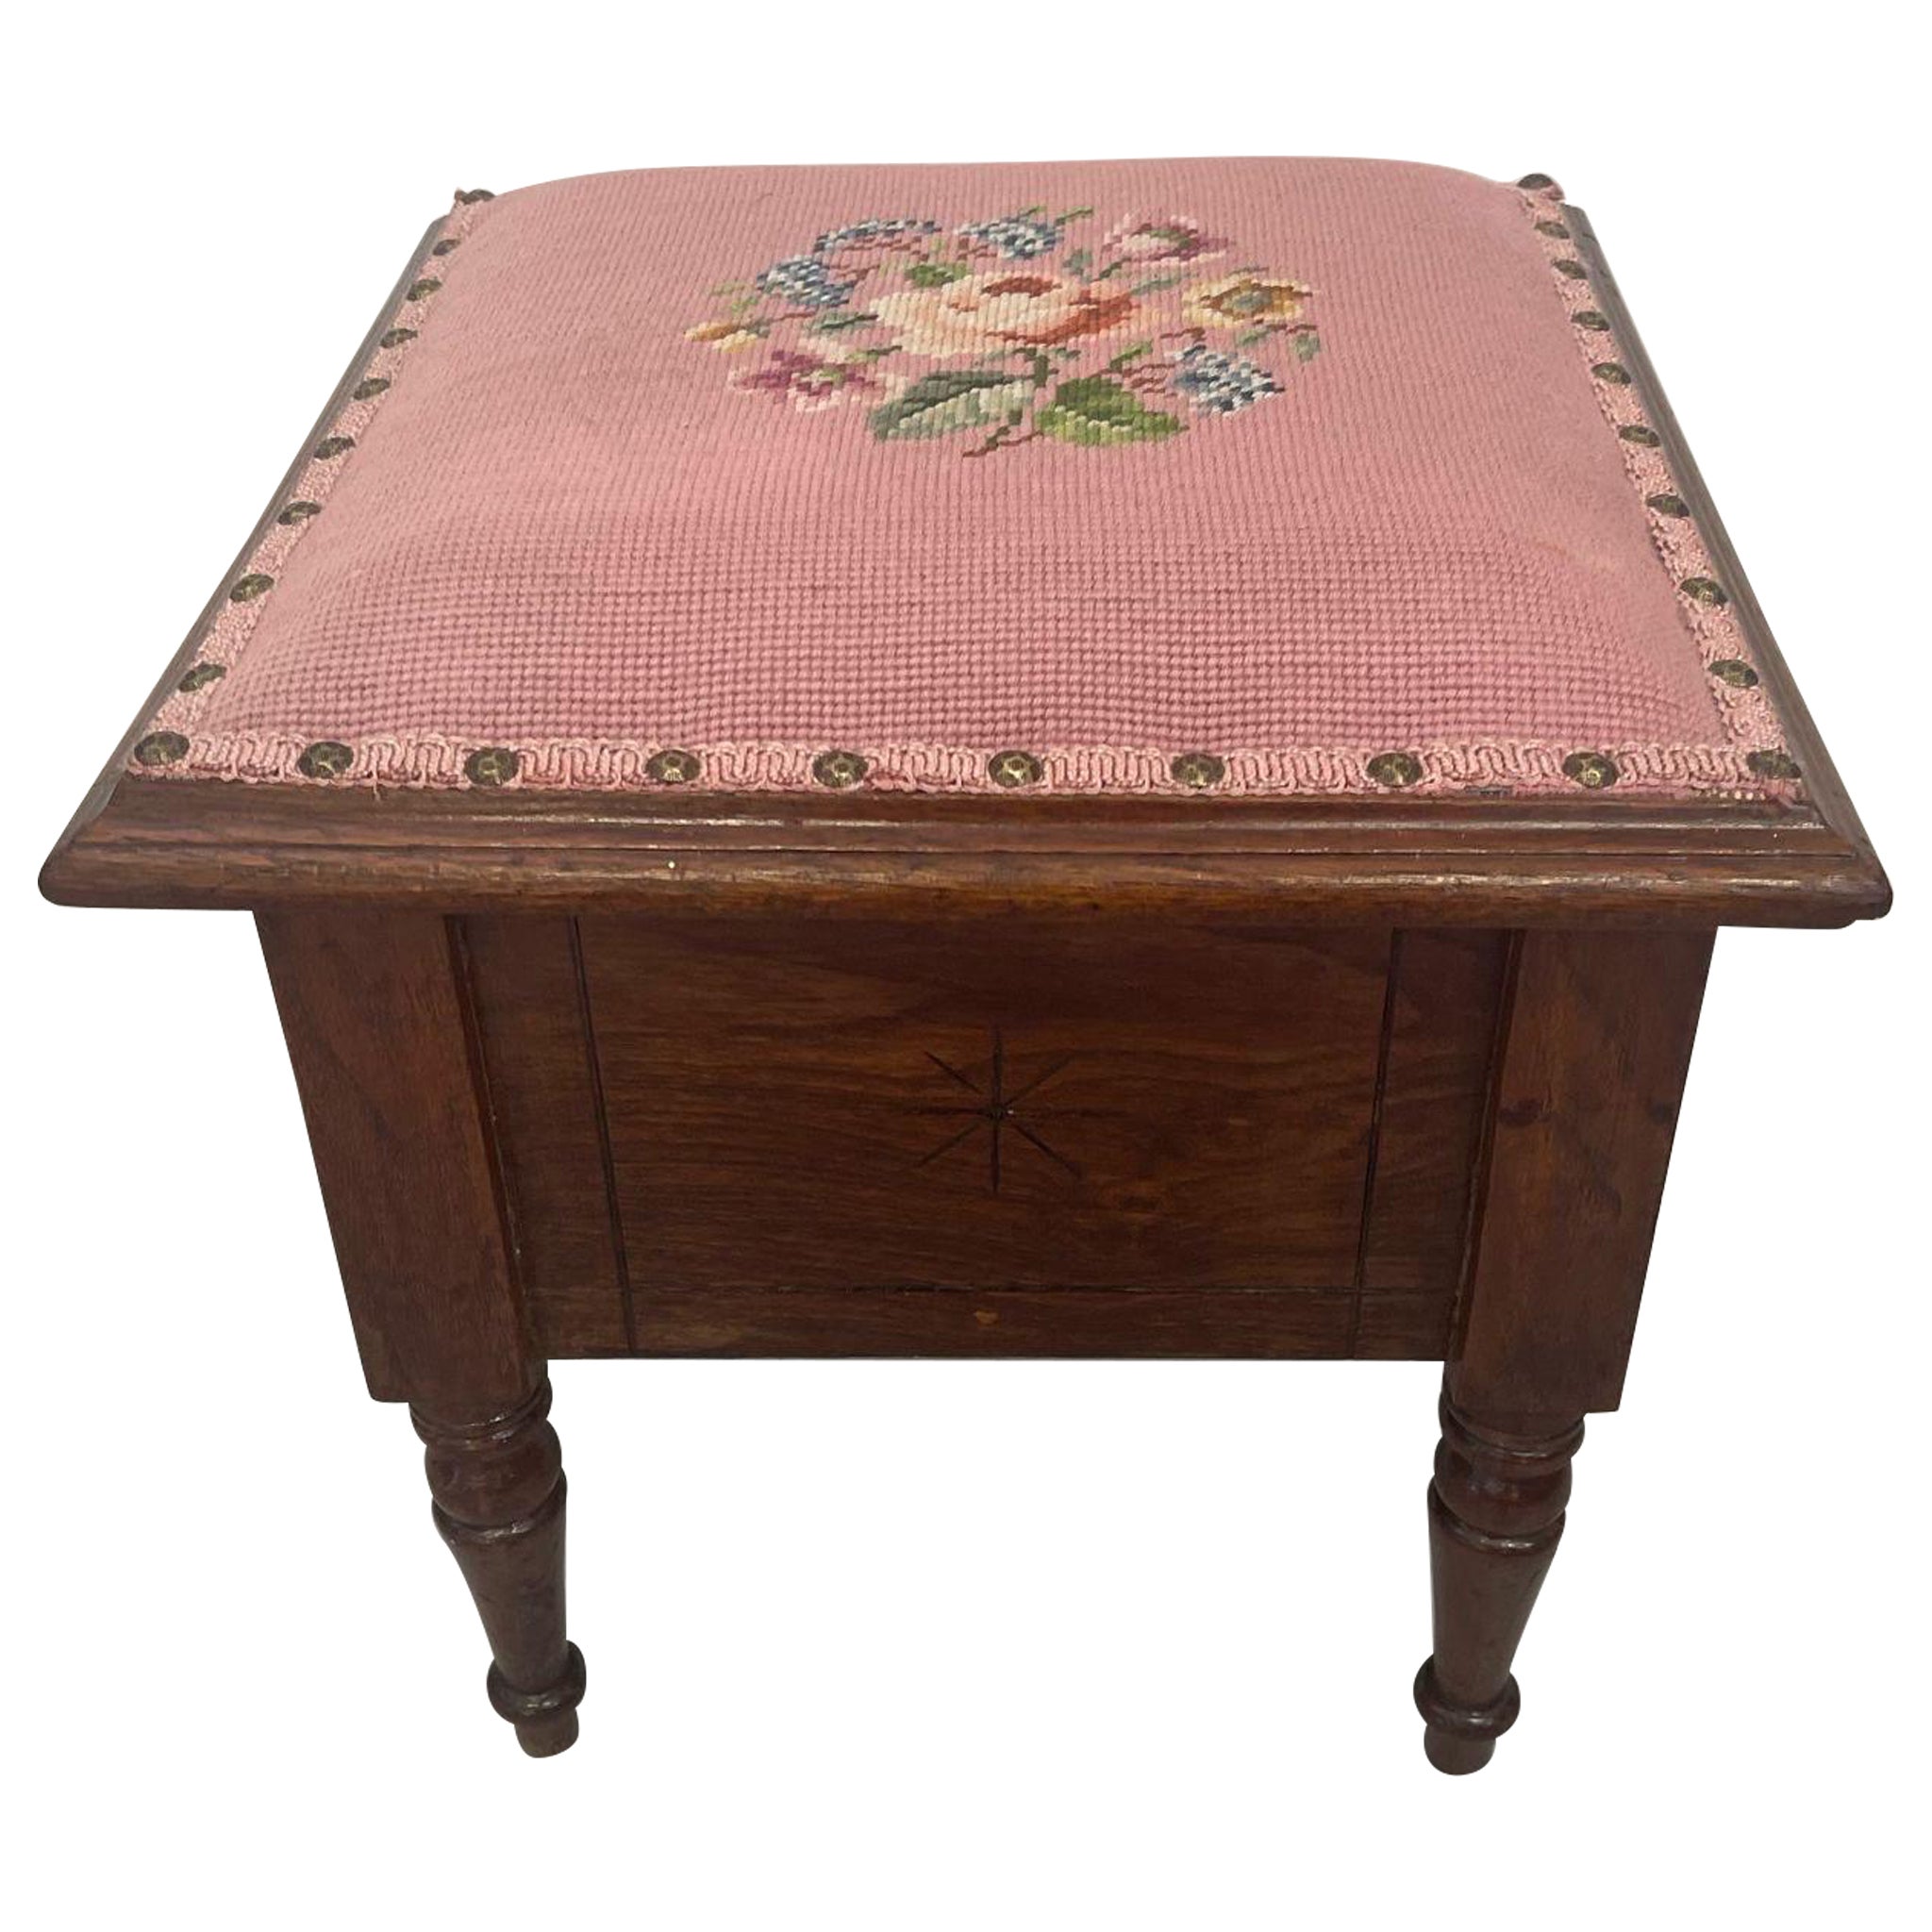 Vintage Needlepoint Embroidery Footstool With Wooden Base. For Sale